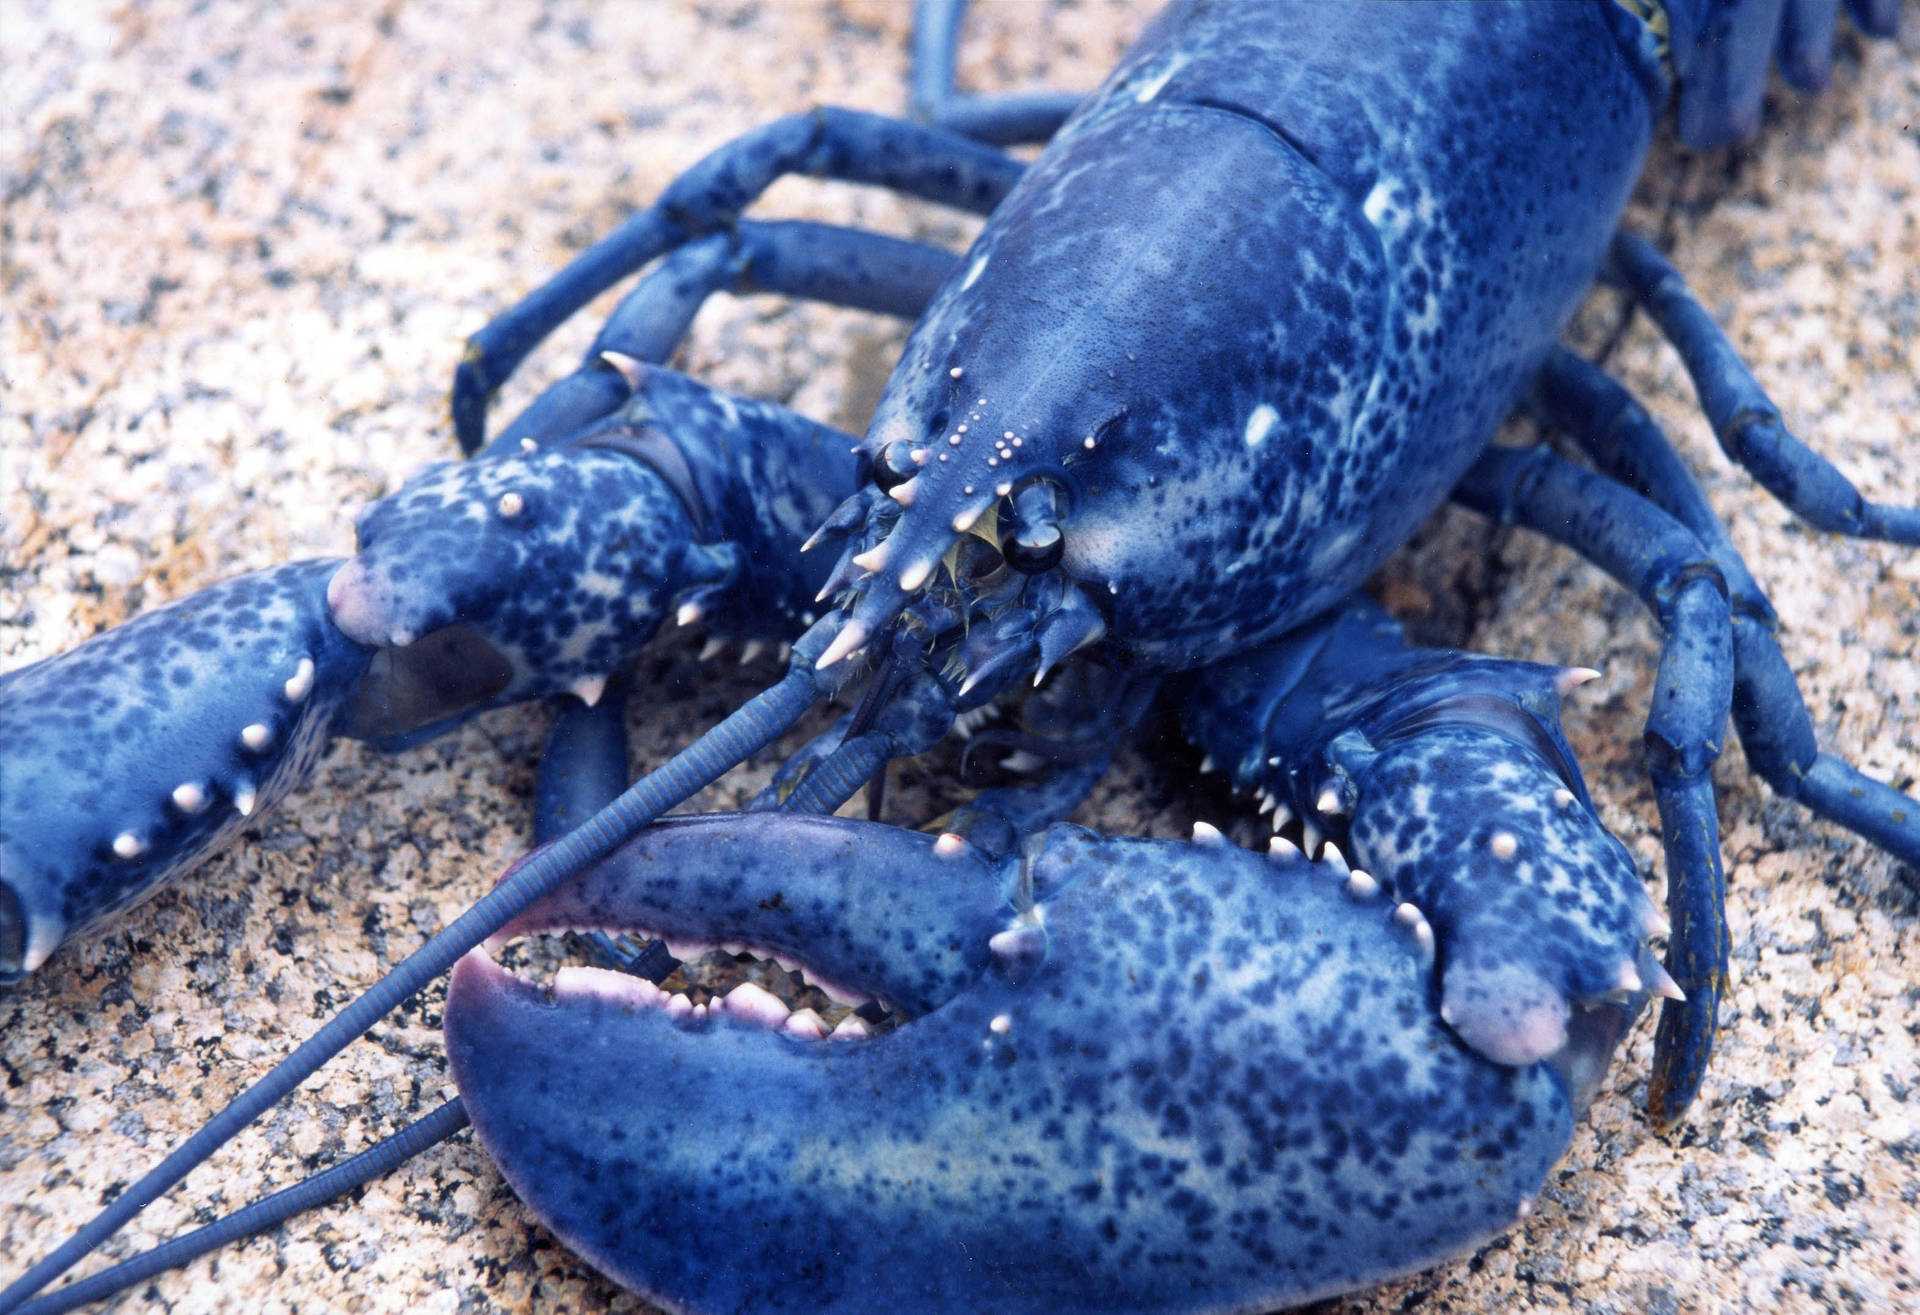 Rare Blue Lobster With Huge Claws